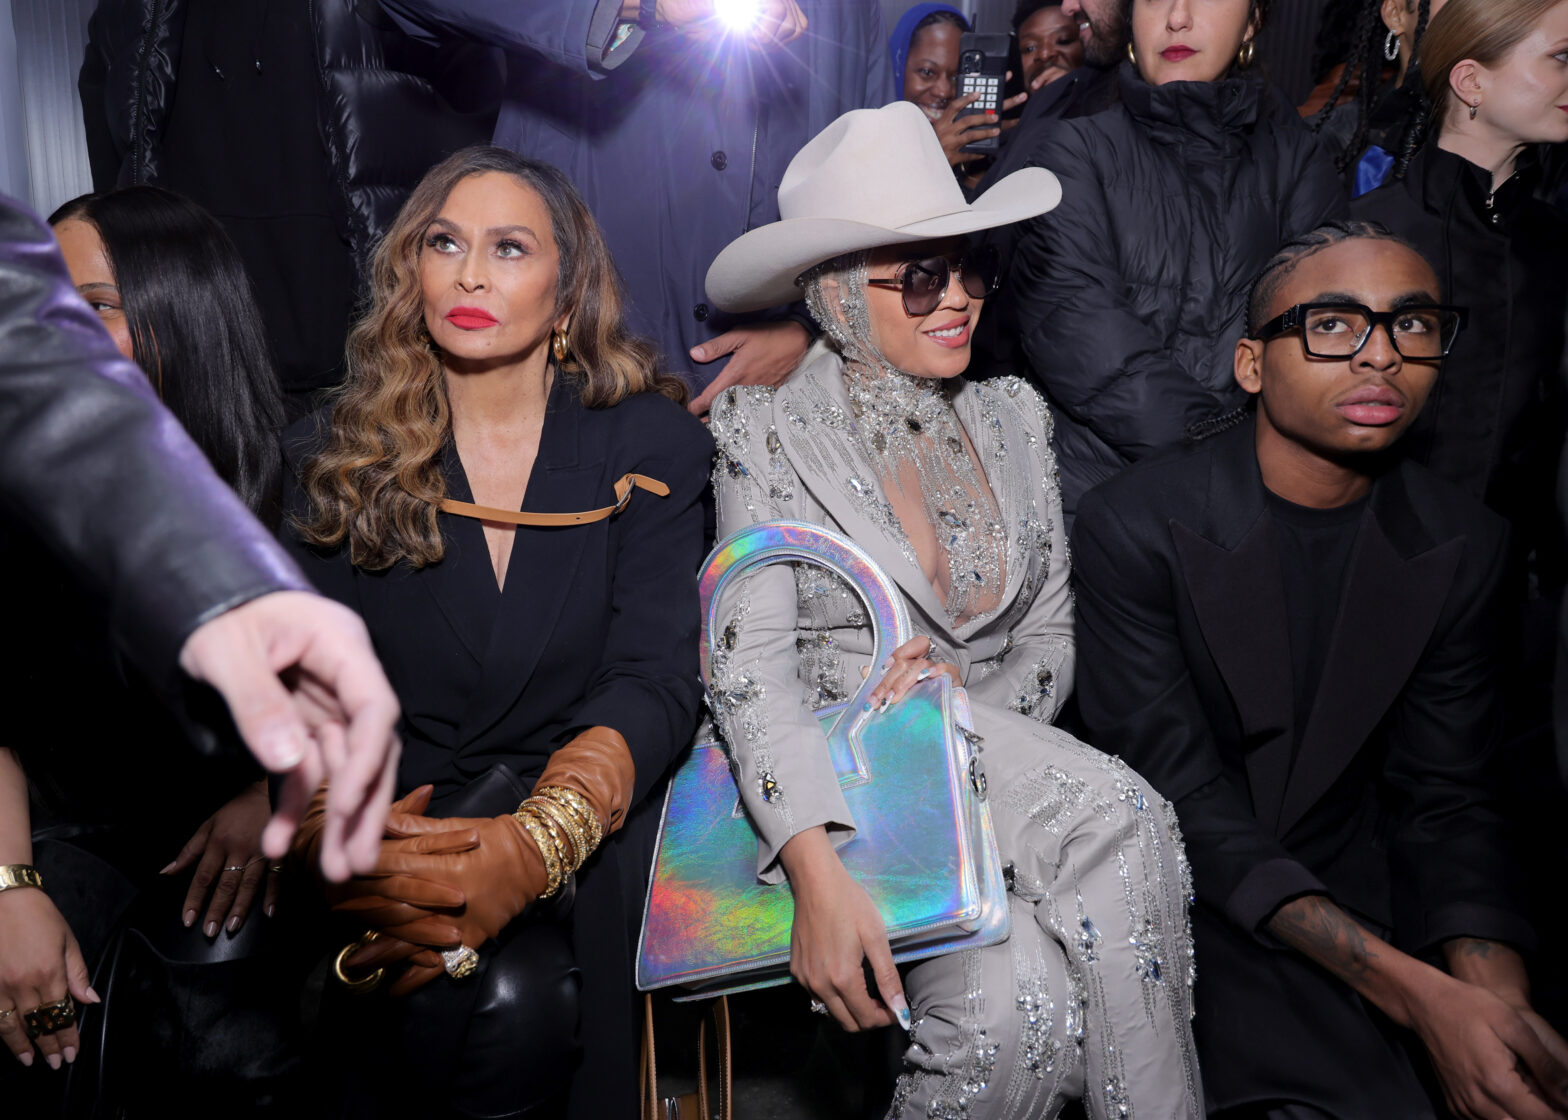 Beyoncé and Tina Knowles sitting front row at a fashion show.